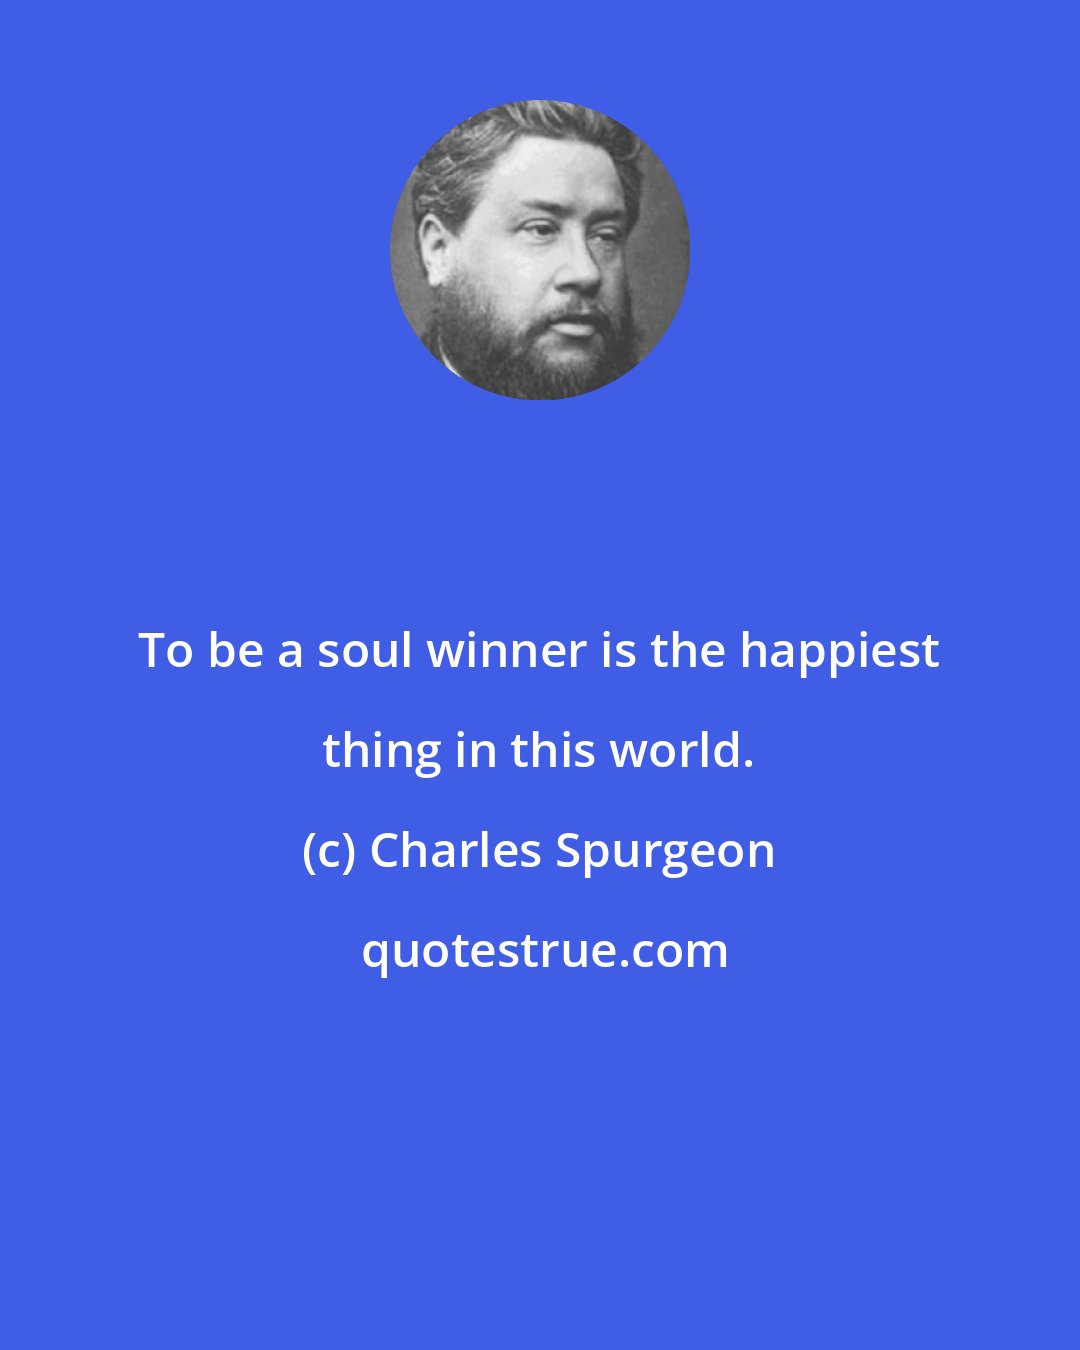 Charles Spurgeon: To be a soul winner is the happiest thing in this world.